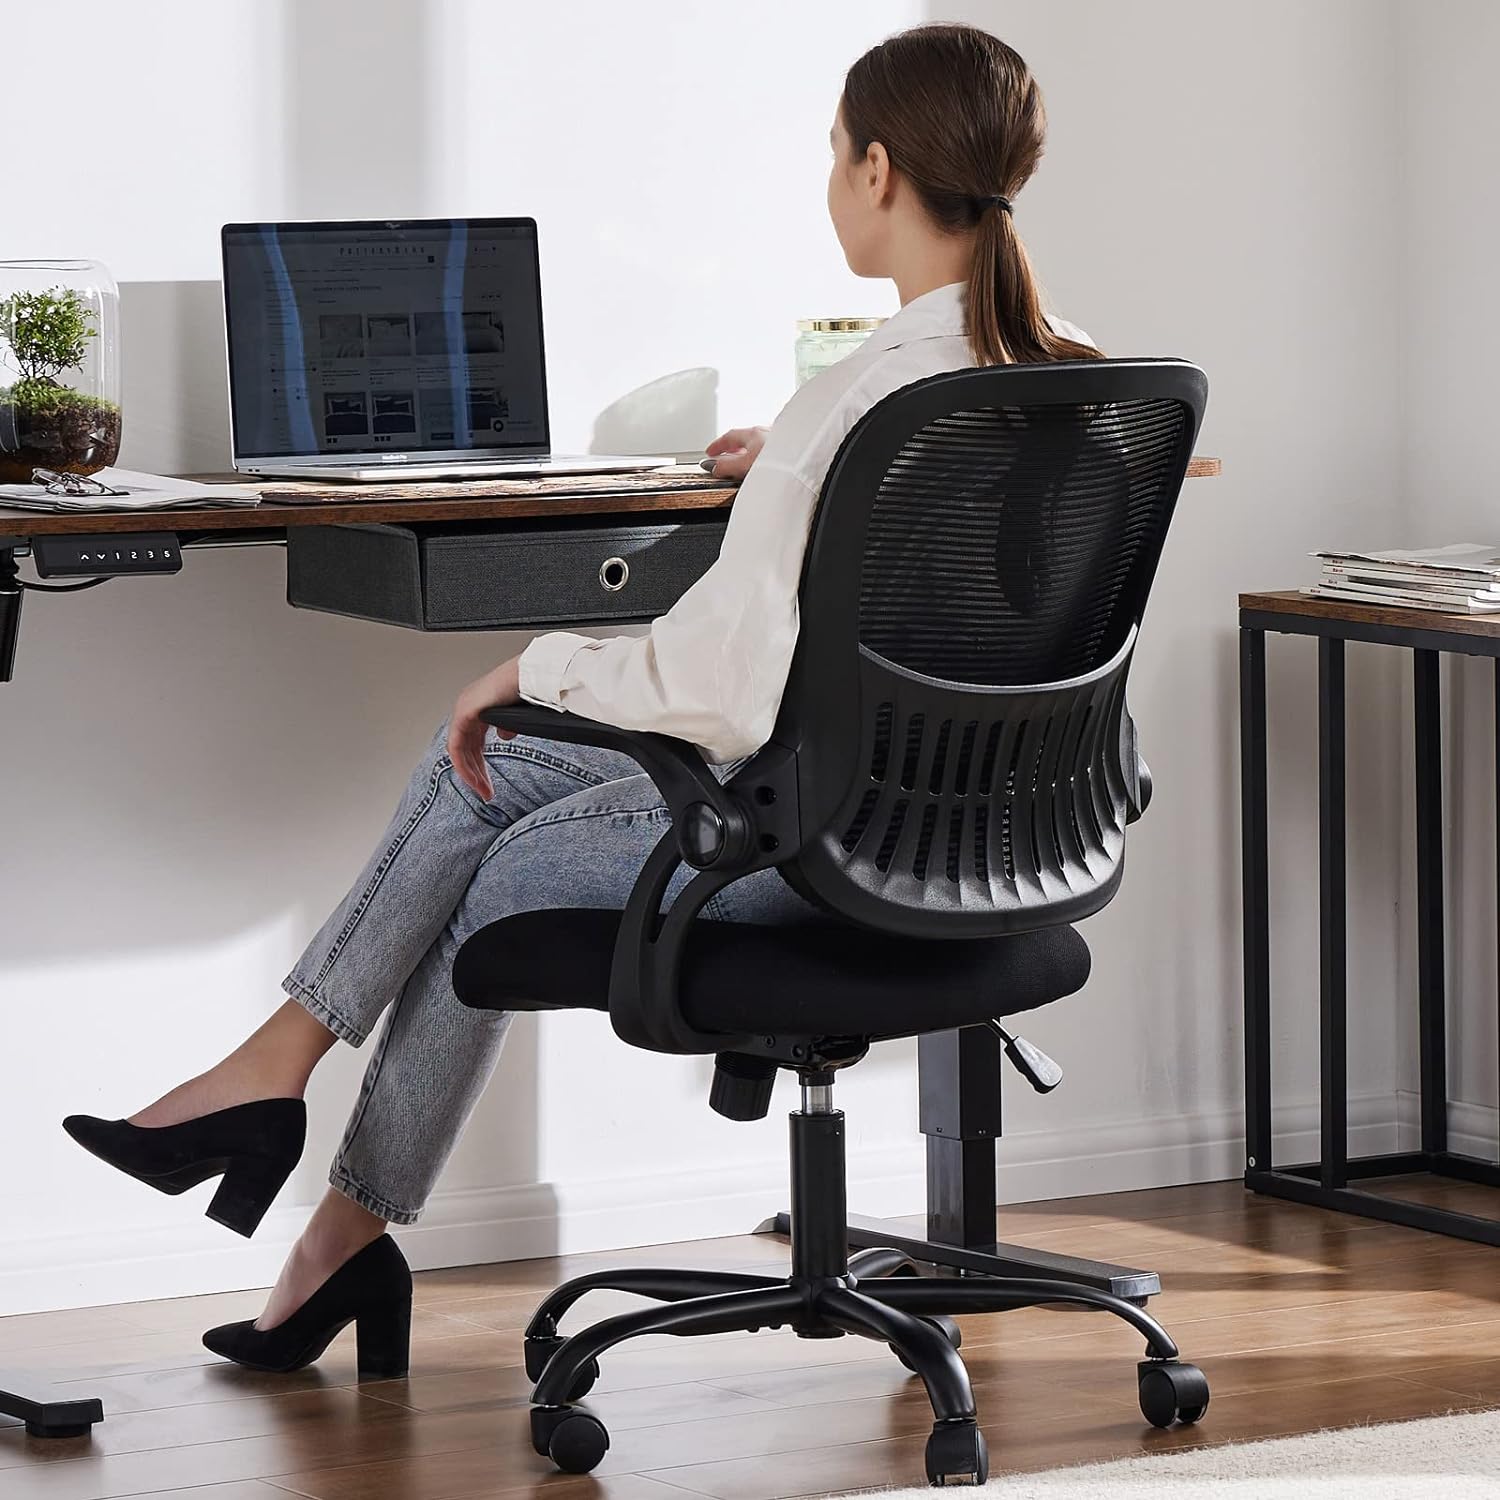 https://bigbigmart.com/wp-content/uploads/2023/12/Sweetcrispy-Office-Computer-Desk-Chair-Ergonomic-Mid-Back-Mesh-Rolling-Work-Swivel-Task-Chairs-with-Wheels-Comfortable-Lumbar-Support-Comfy-Flip-up-Arms-for-Home-Bedroom-Study-Student-Black6.jpg